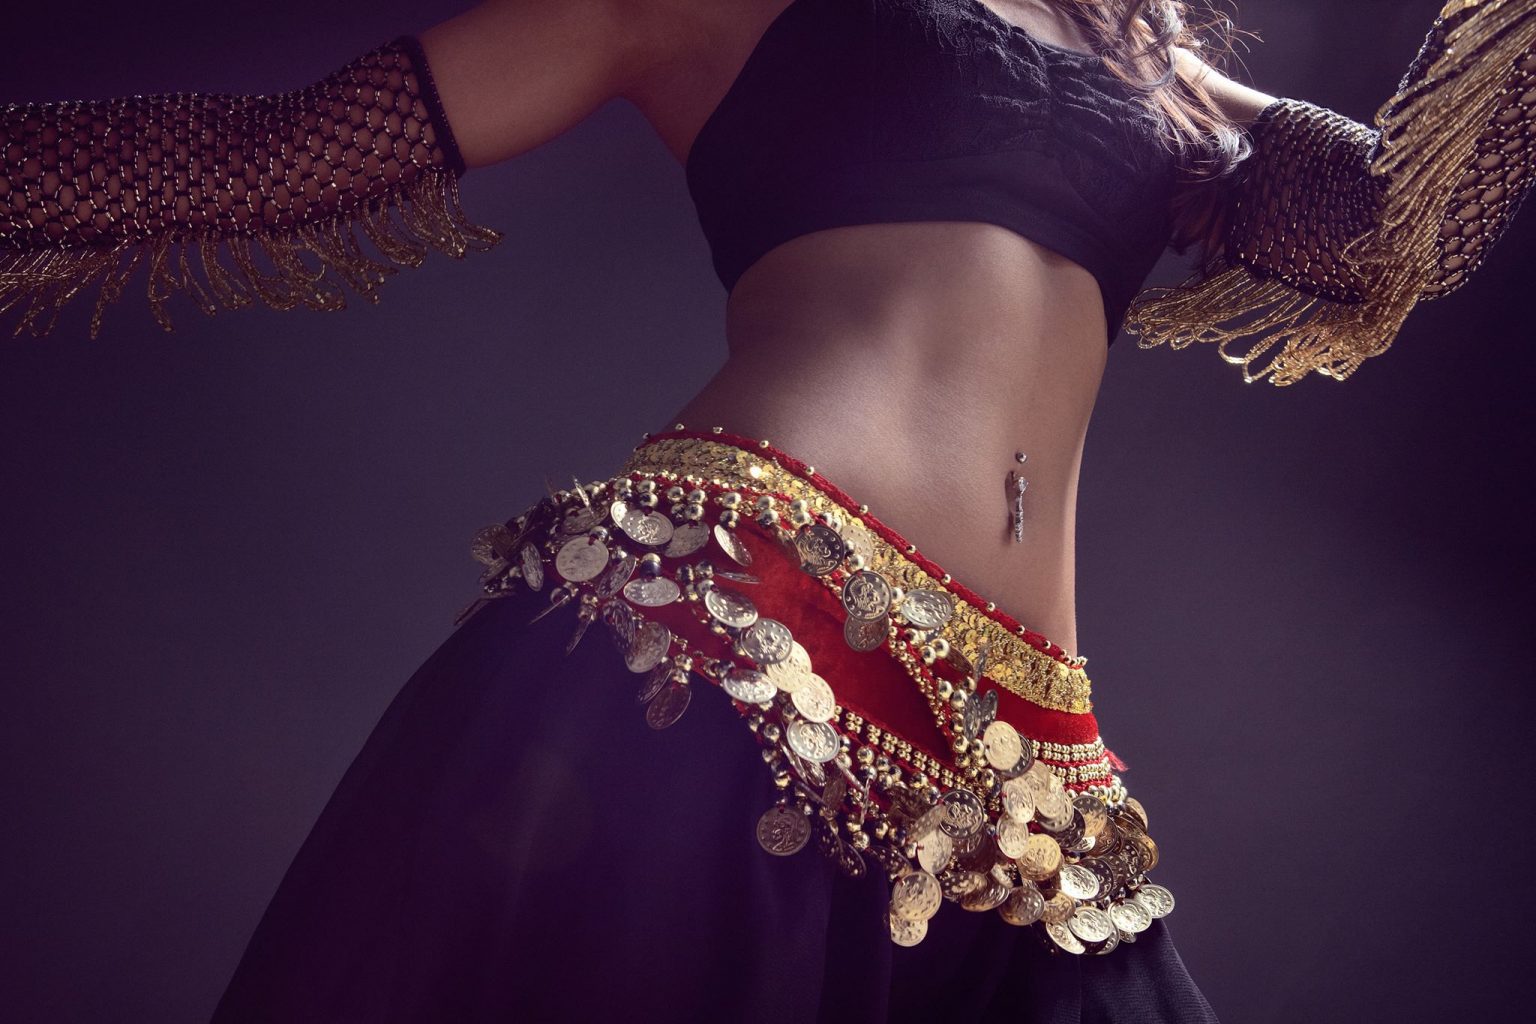 Belly Dance ❤️ Best adult photos at thesexy.es picture pic pic